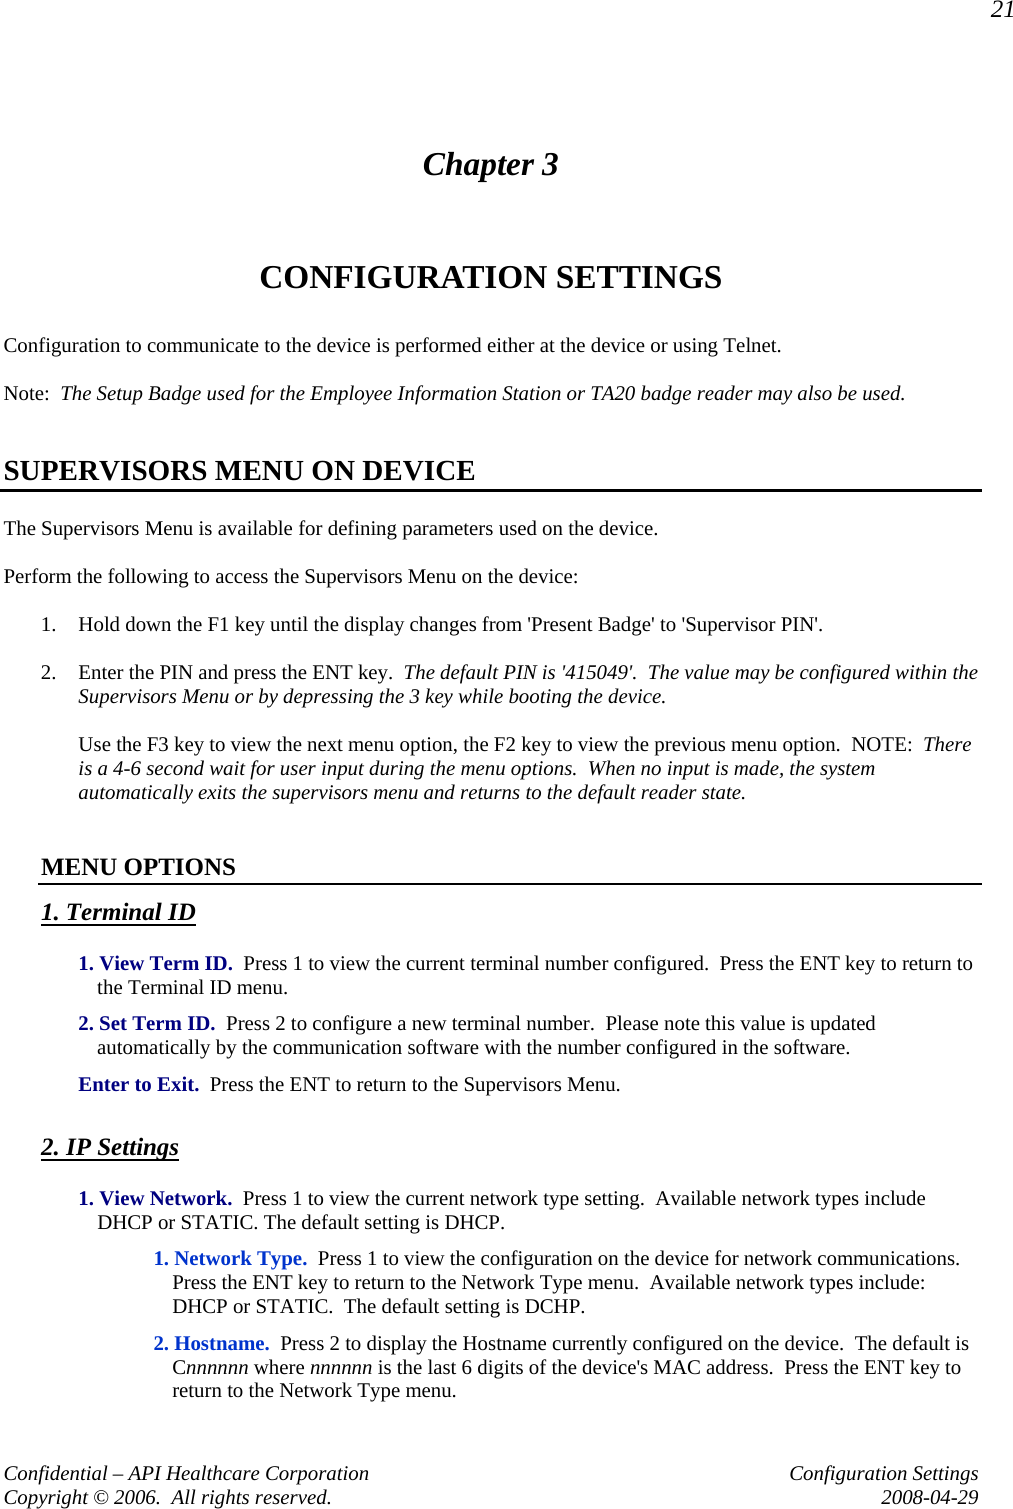 21 Confidential – API Healthcare Corporation  Configuration Settings Copyright © 2006.  All rights reserved.  2008-04-29 Chapter 3 CONFIGURATION SETTINGS Configuration to communicate to the device is performed either at the device or using Telnet.  Note:  The Setup Badge used for the Employee Information Station or TA20 badge reader may also be used.     SUPERVISORS MENU ON DEVICE The Supervisors Menu is available for defining parameters used on the device.    Perform the following to access the Supervisors Menu on the device:  1. Hold down the F1 key until the display changes from &apos;Present Badge&apos; to &apos;Supervisor PIN&apos;.  2. Enter the PIN and press the ENT key.  The default PIN is &apos;415049&apos;.  The value may be configured within the Supervisors Menu or by depressing the 3 key while booting the device.    Use the F3 key to view the next menu option, the F2 key to view the previous menu option.  NOTE:  There is a 4-6 second wait for user input during the menu options.  When no input is made, the system automatically exits the supervisors menu and returns to the default reader state.   MENU OPTIONS 1. Terminal ID  1. View Term ID.  Press 1 to view the current terminal number configured.  Press the ENT key to return to the Terminal ID menu.  2. Set Term ID.  Press 2 to configure a new terminal number.  Please note this value is updated automatically by the communication software with the number configured in the software.  Enter to Exit.  Press the ENT to return to the Supervisors Menu.  2. IP Settings   1. View Network.  Press 1 to view the current network type setting.  Available network types include DHCP or STATIC. The default setting is DHCP.   1. Network Type.  Press 1 to view the configuration on the device for network communications.  Press the ENT key to return to the Network Type menu.  Available network types include:  DHCP or STATIC.  The default setting is DCHP.      2. Hostname.  Press 2 to display the Hostname currently configured on the device.  The default is Cnnnnnn where nnnnnn is the last 6 digits of the device&apos;s MAC address.  Press the ENT key to return to the Network Type menu. 